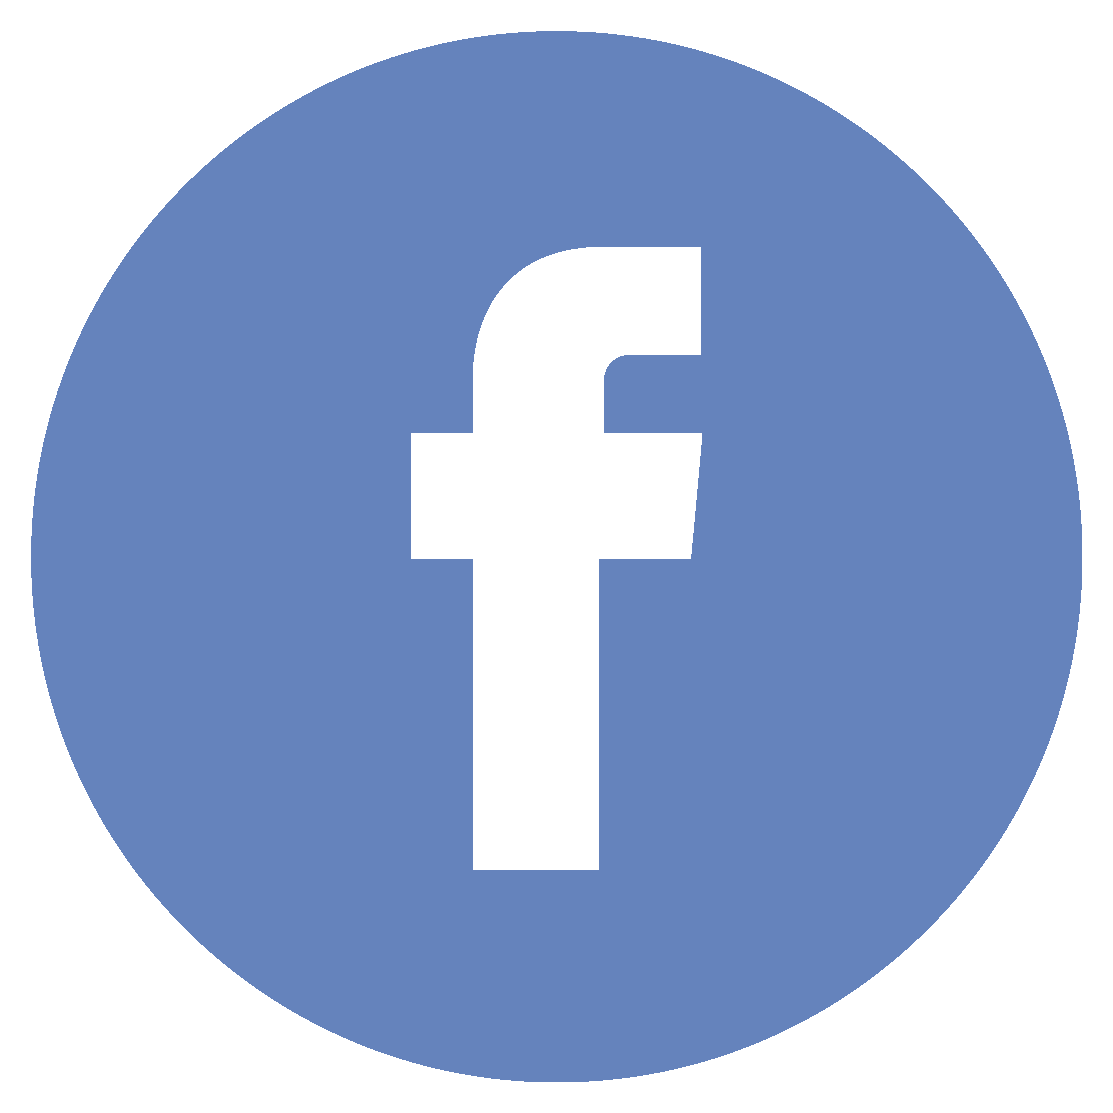 Icono Facebook-01 - Facebook Small Icon Png (1276x1276), Png Download